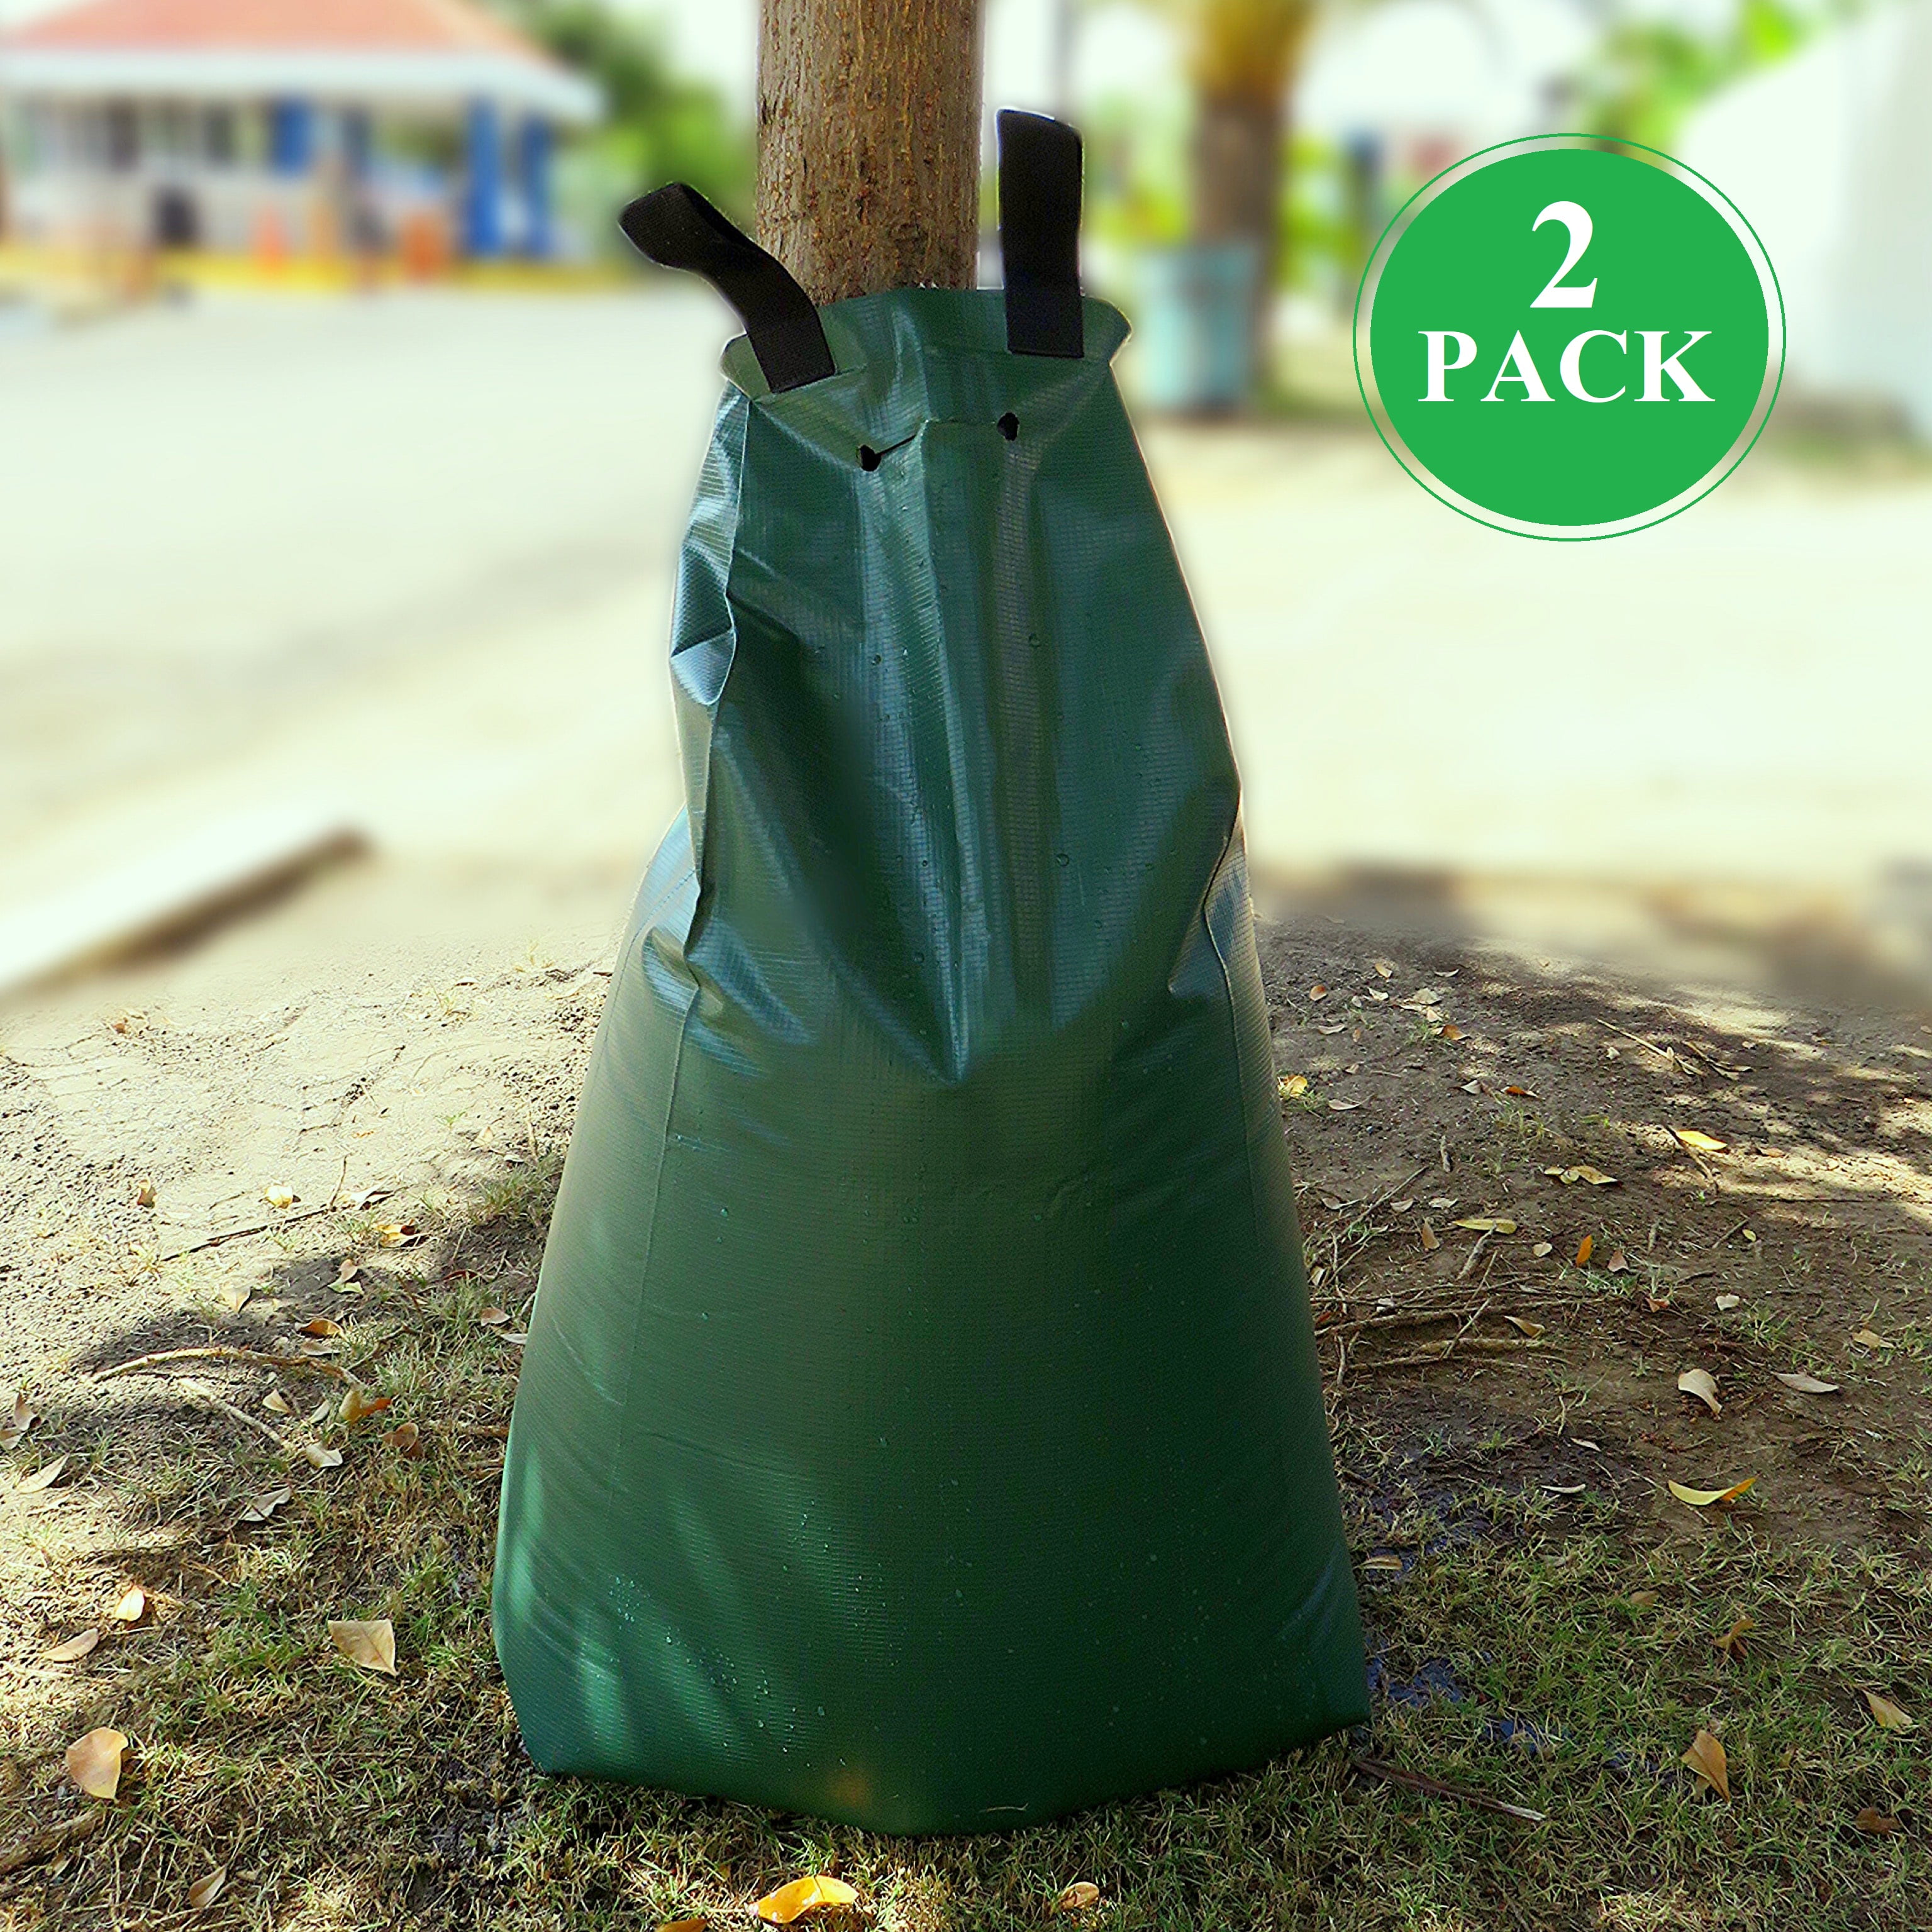 ANPHSIN 4 Pack 20 Gallon Slow Release Tree Watering Bags Zippered Automatic Drip Tree Irrigation Bags Made of Premium PE Material with 3-6 Hours Releasing Time for Trees